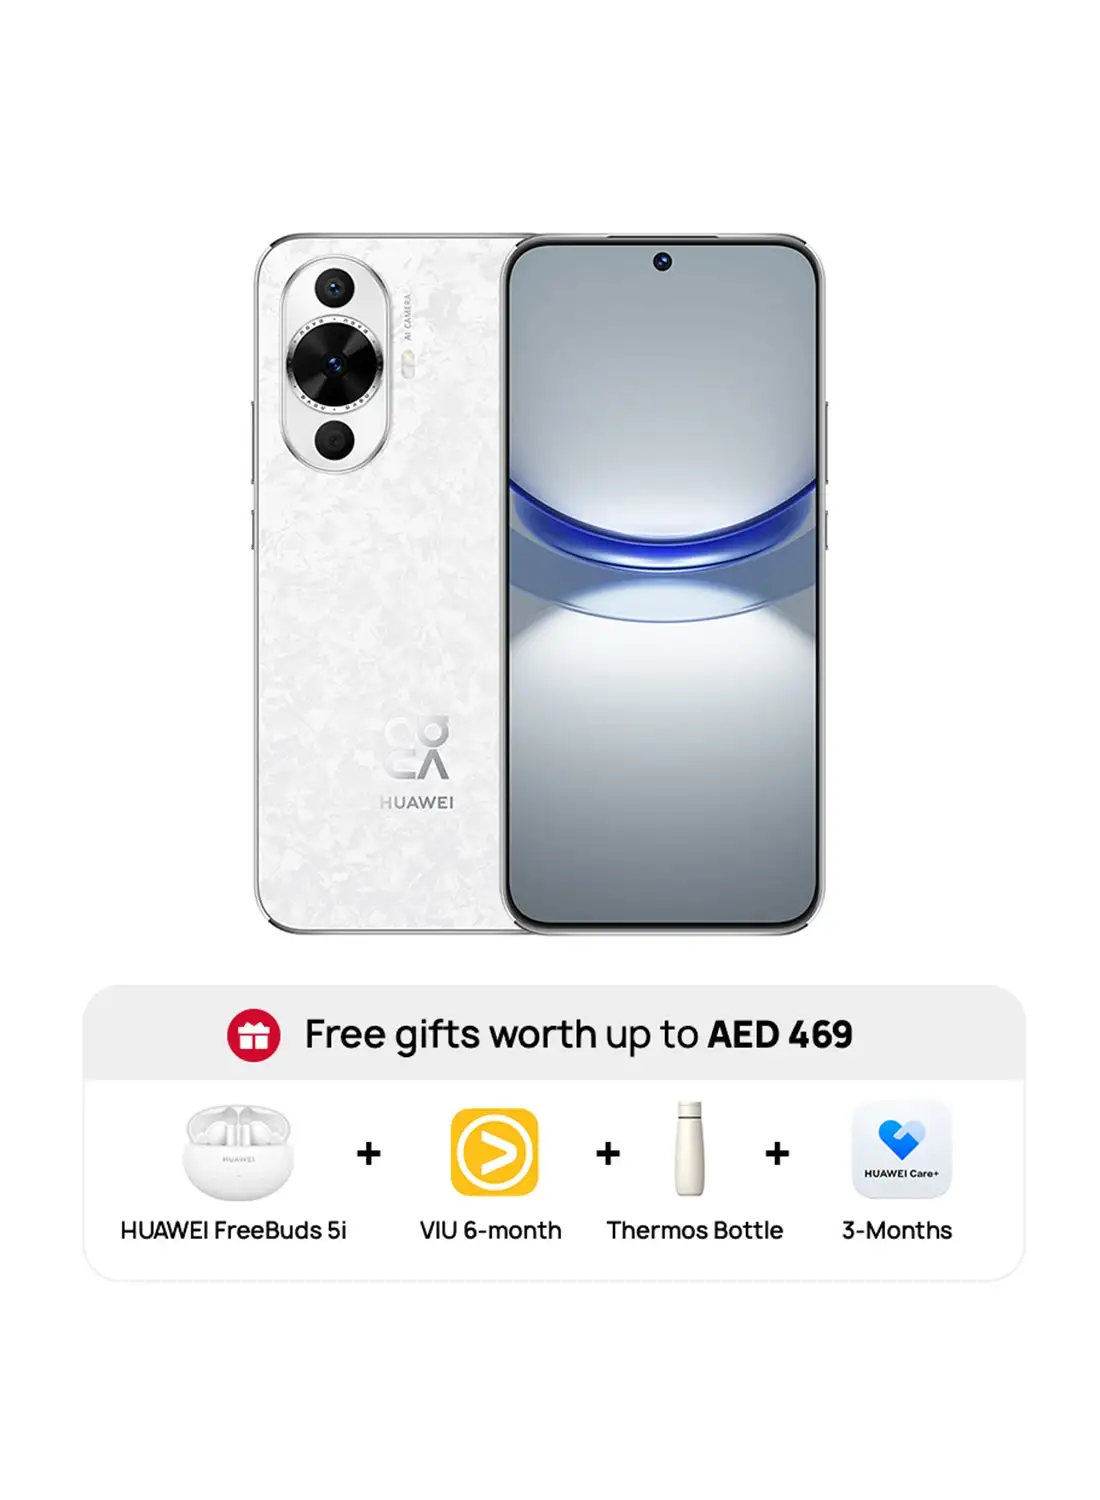 HUAWEI Nova 12S Dual SIM White 8GB RAM 256GB 4G LTE With FB5i + 6 Months VIU + Thermos Bottle + 3 Months Huawei Care+ Worth AED 469 - Middle East Version